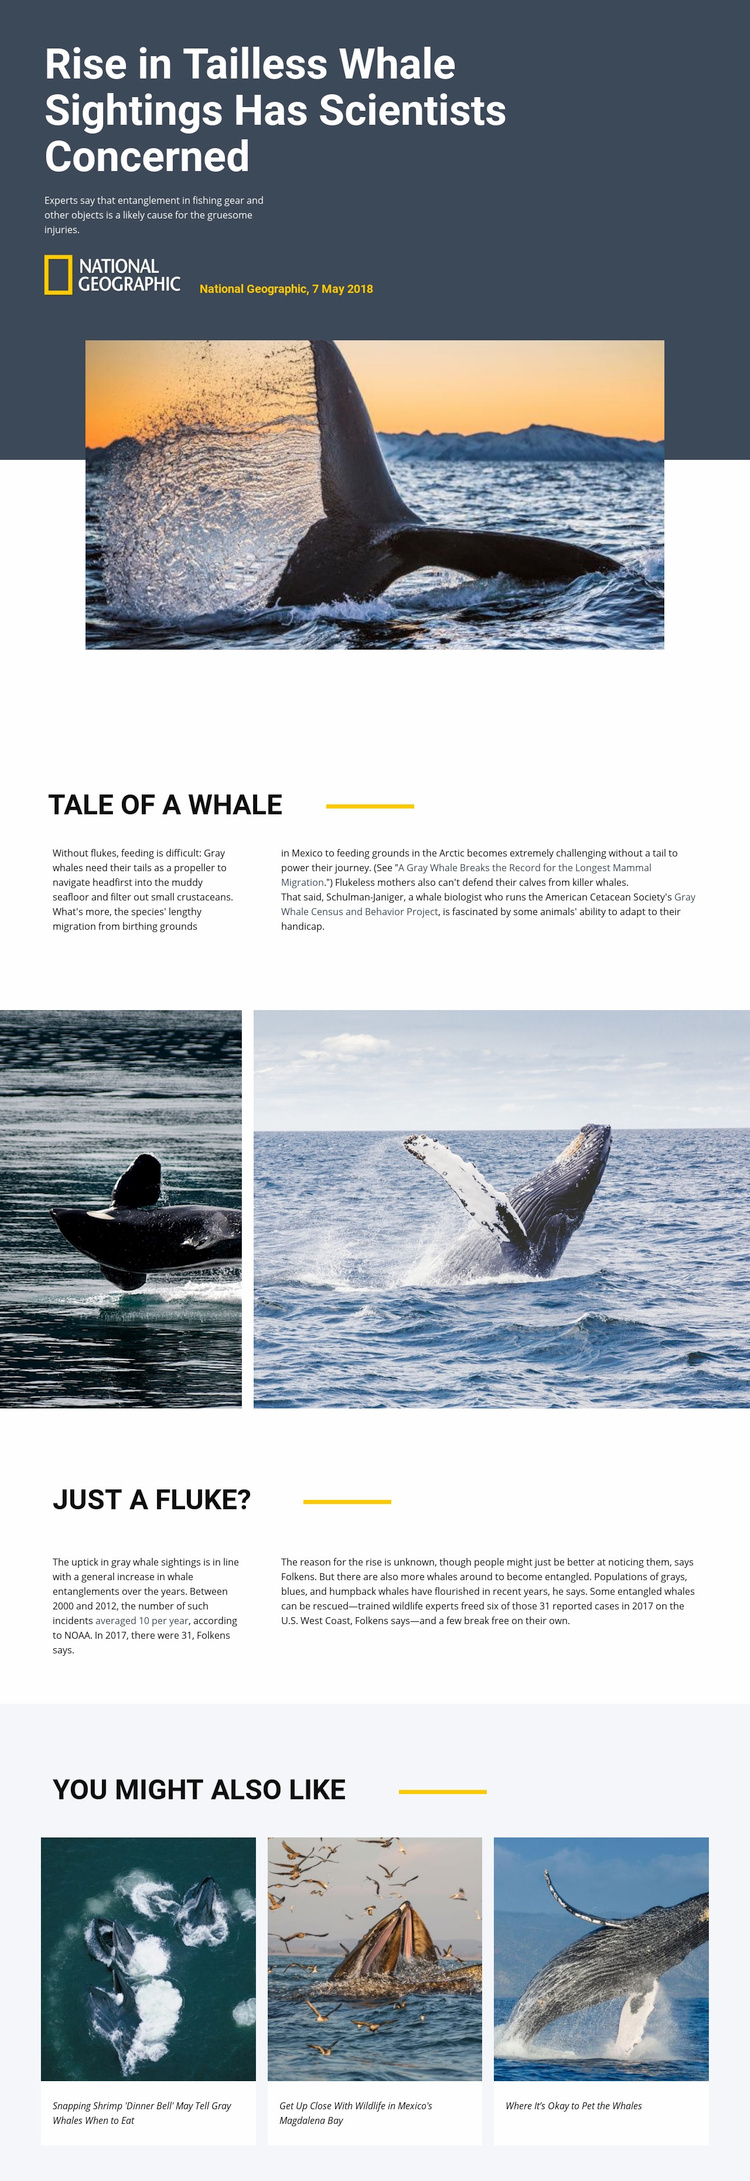 Whale watching center Wix Template Alternative